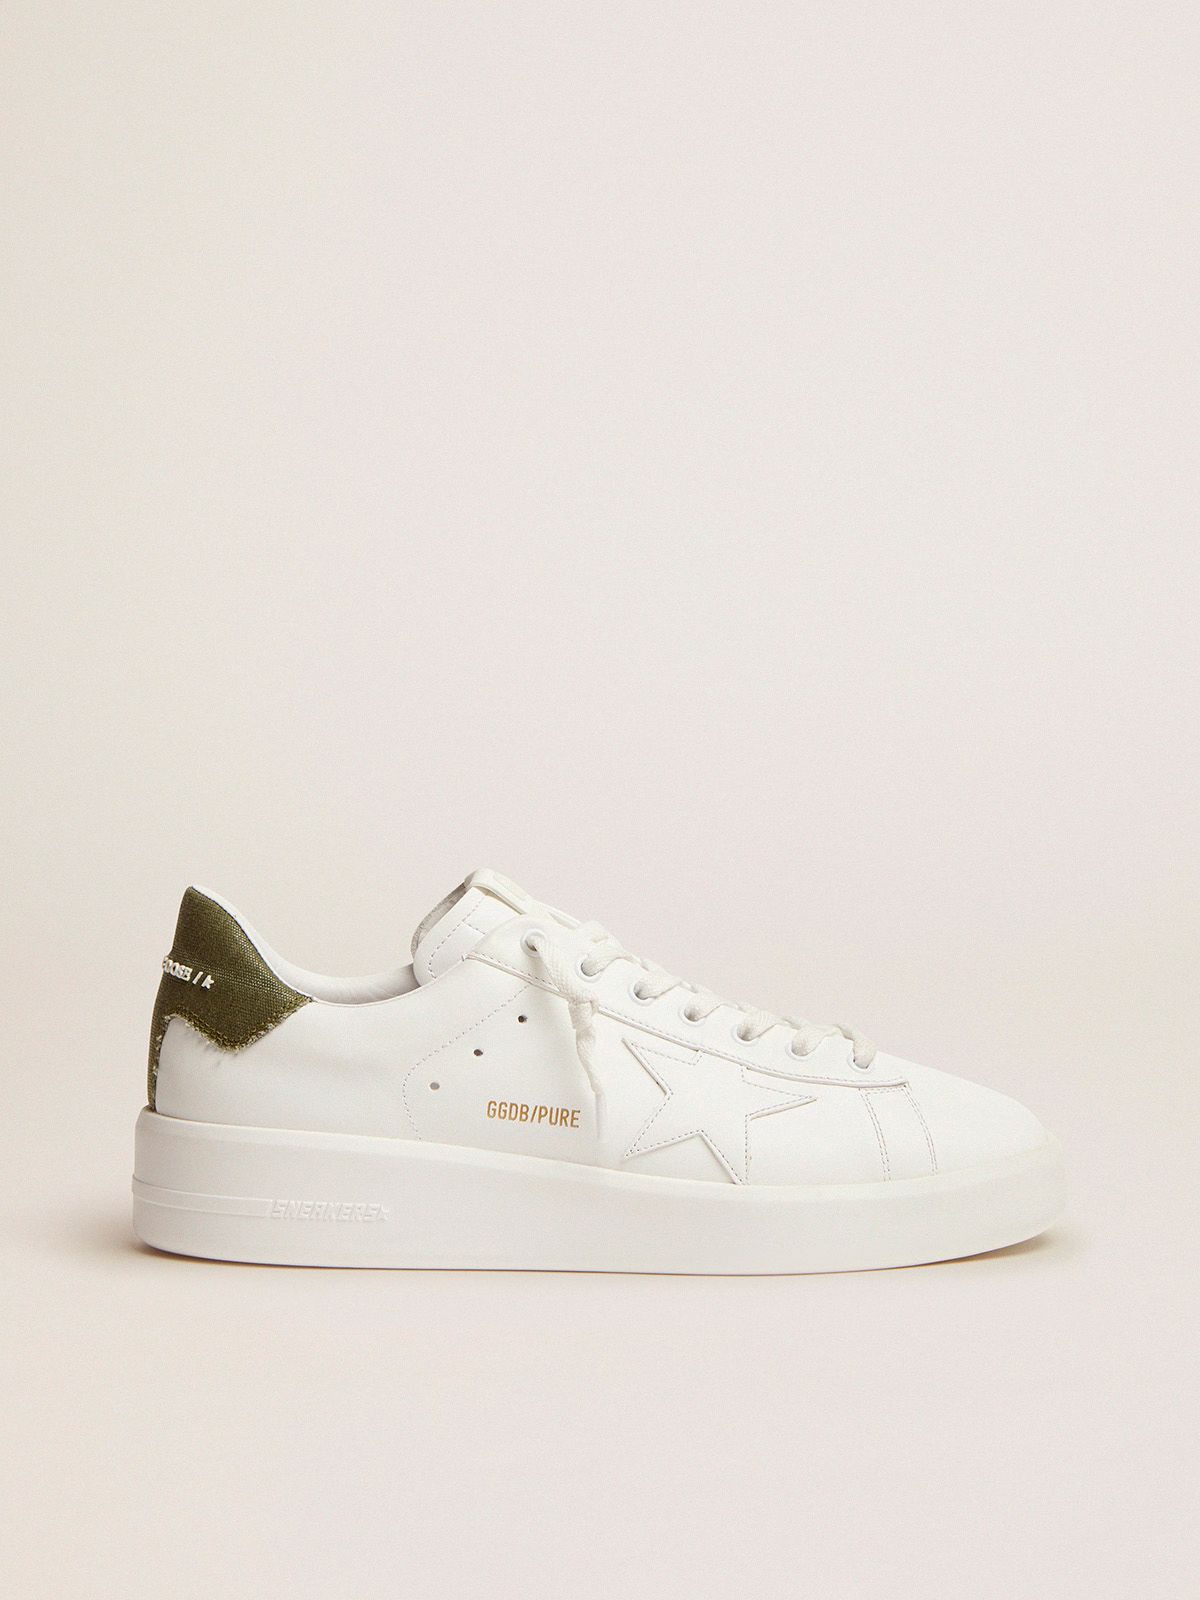 Purestar sneakers in white leather with green canvas heel tab